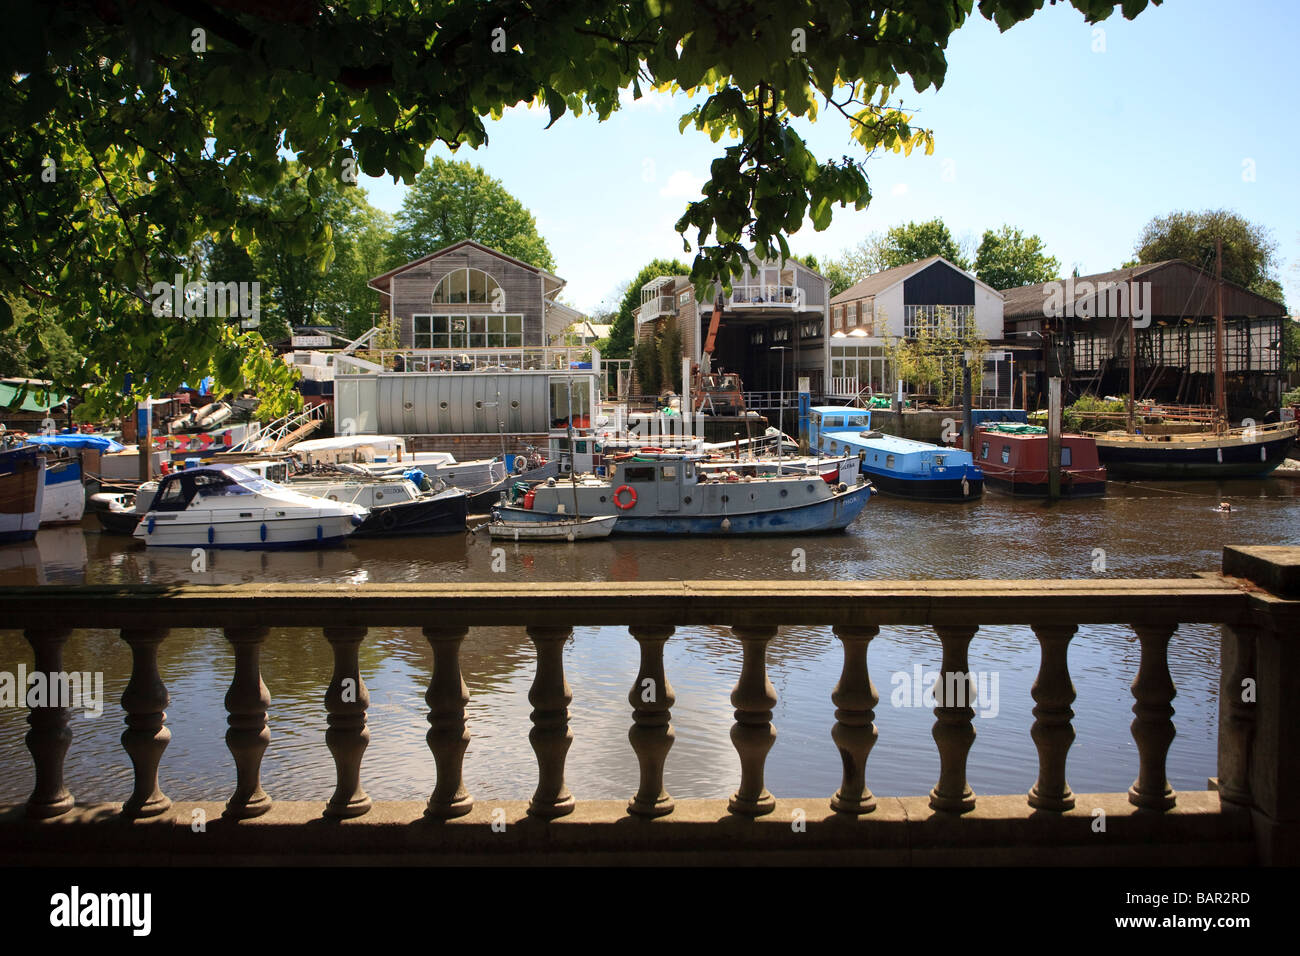 Waterside Homes and boat building on Eel Pie Island in the River Thames at Twickenham Stock Photo